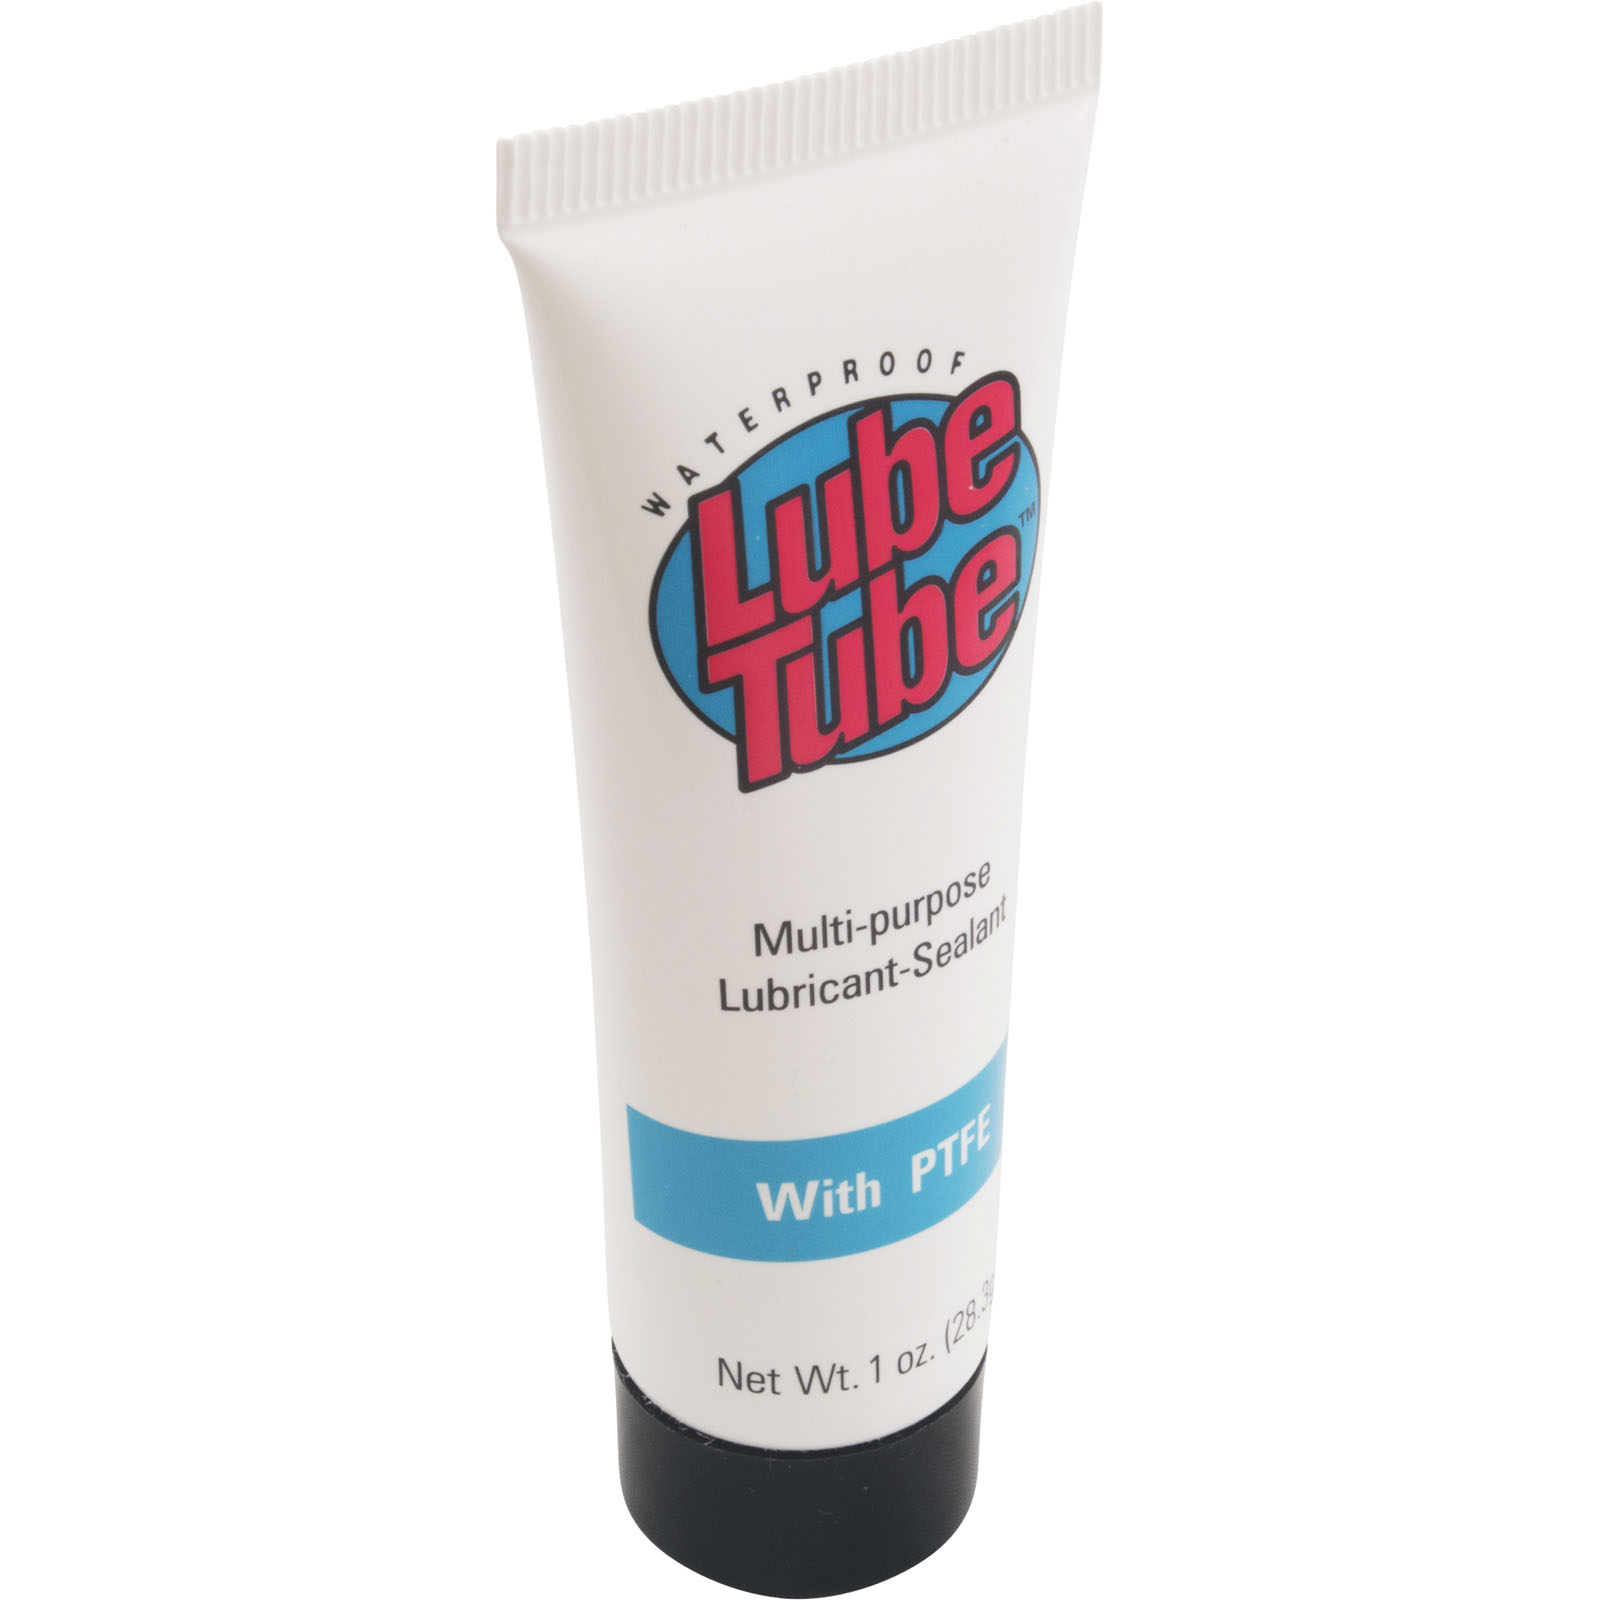 LUBE TUBE, ROPER PRODUCTS, 1OZ, WITH PFTE | 150